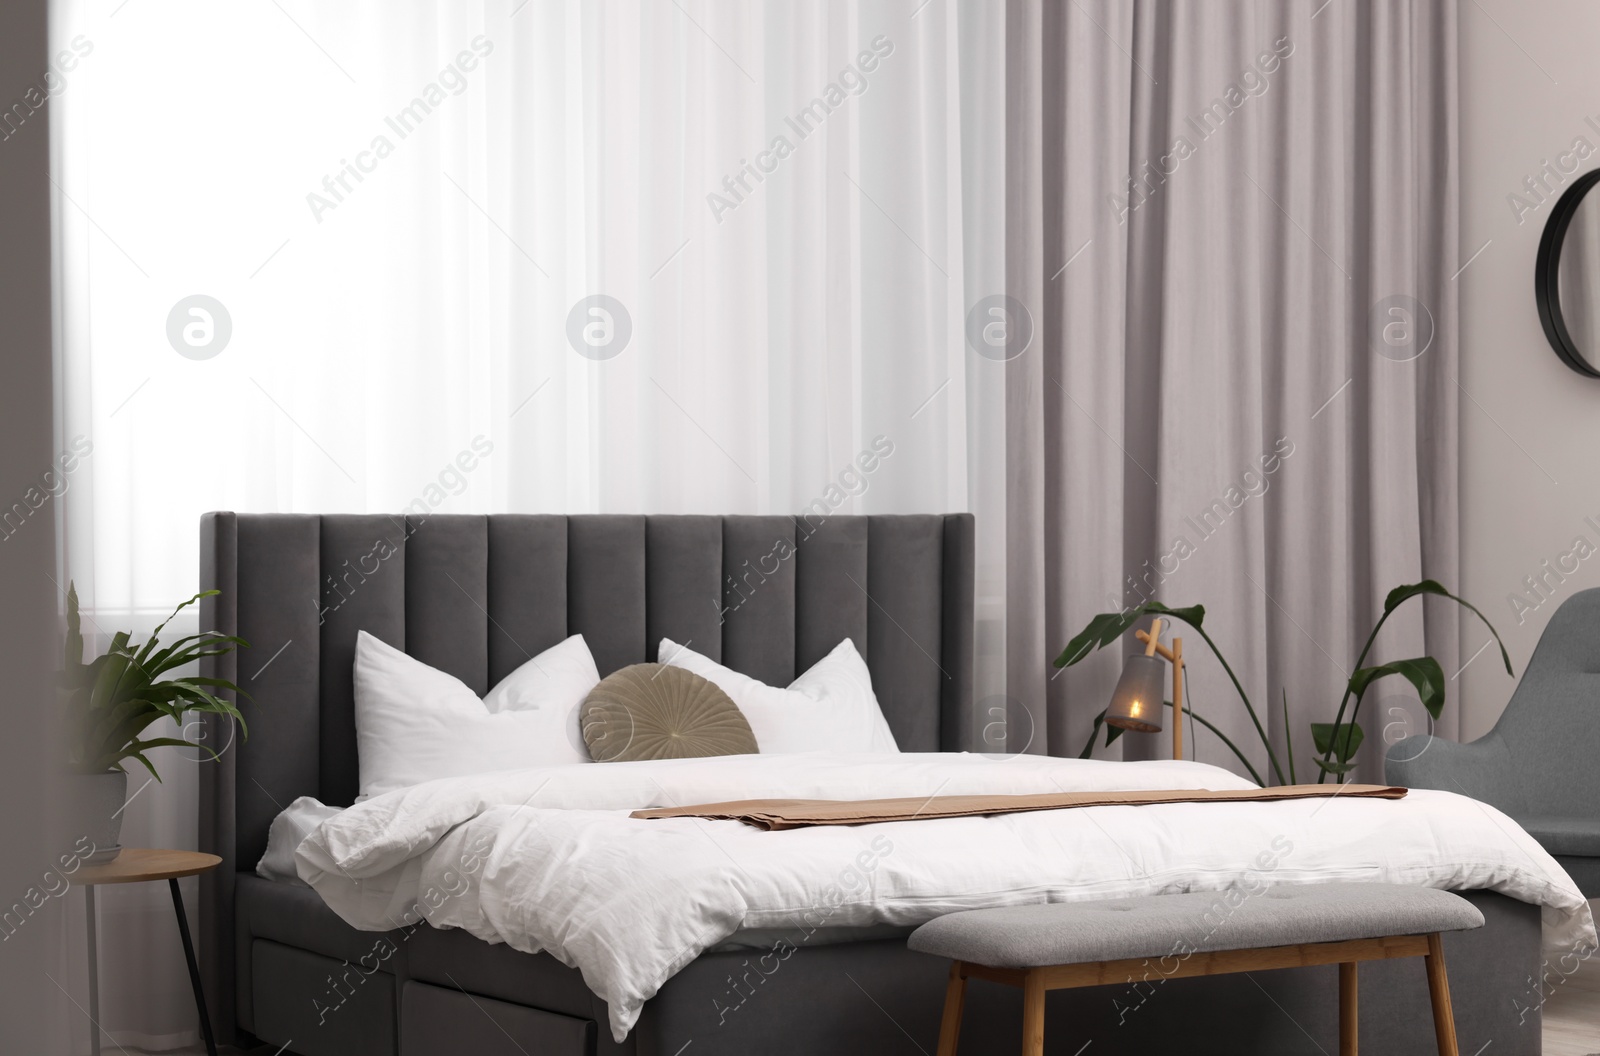 Photo of Stylish bedroom interior with large bed, ottoman, lamp and houseplants